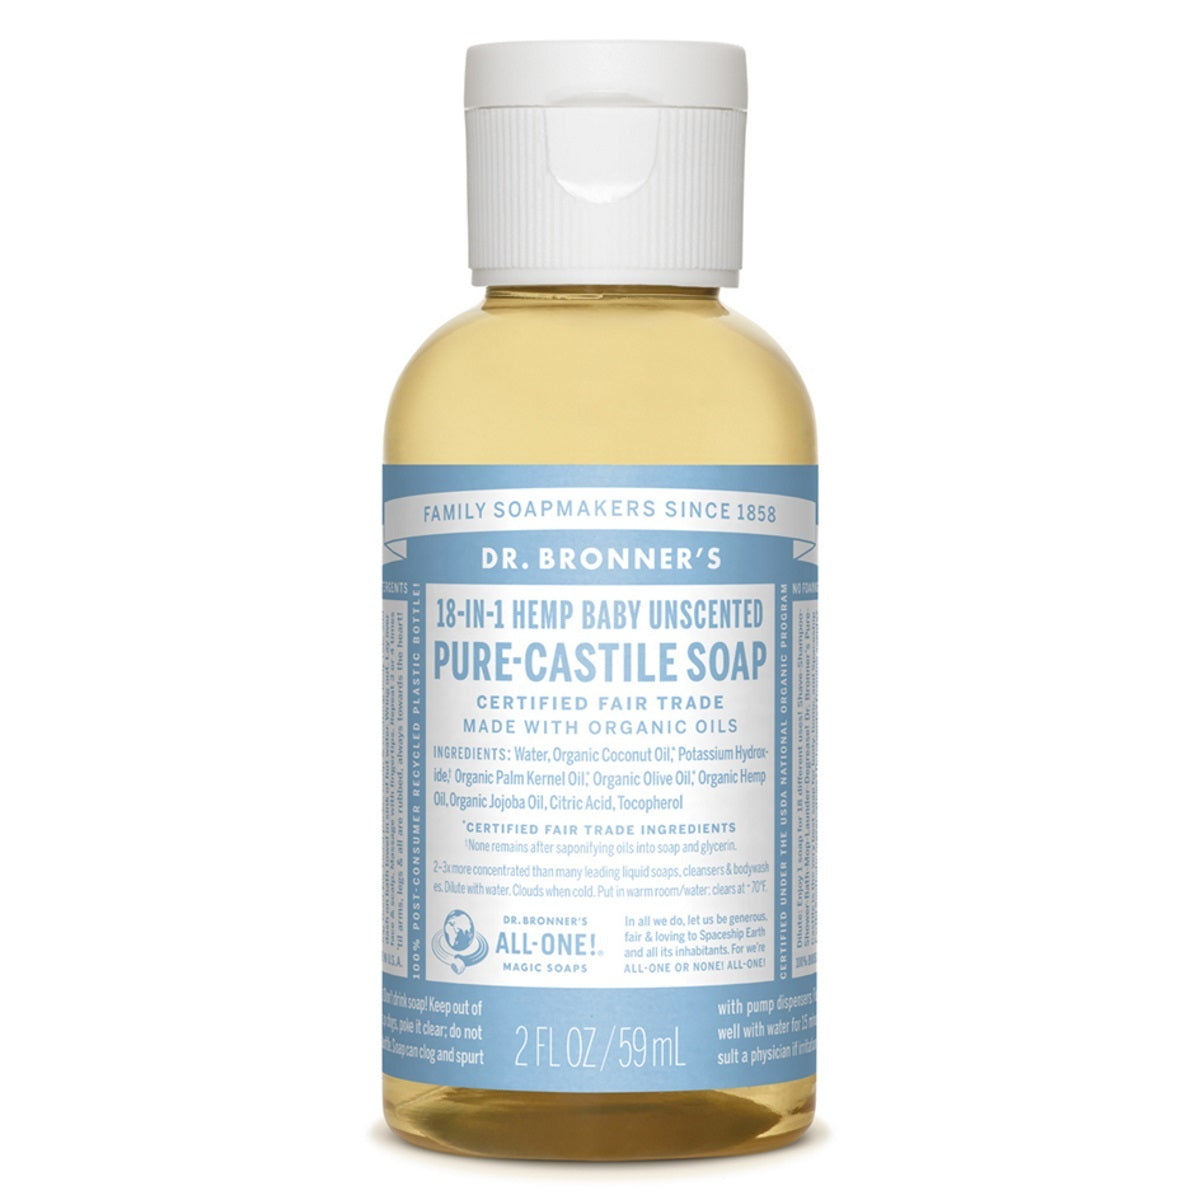 Primary image of Trial Size Baby Unscented Liquid Soap